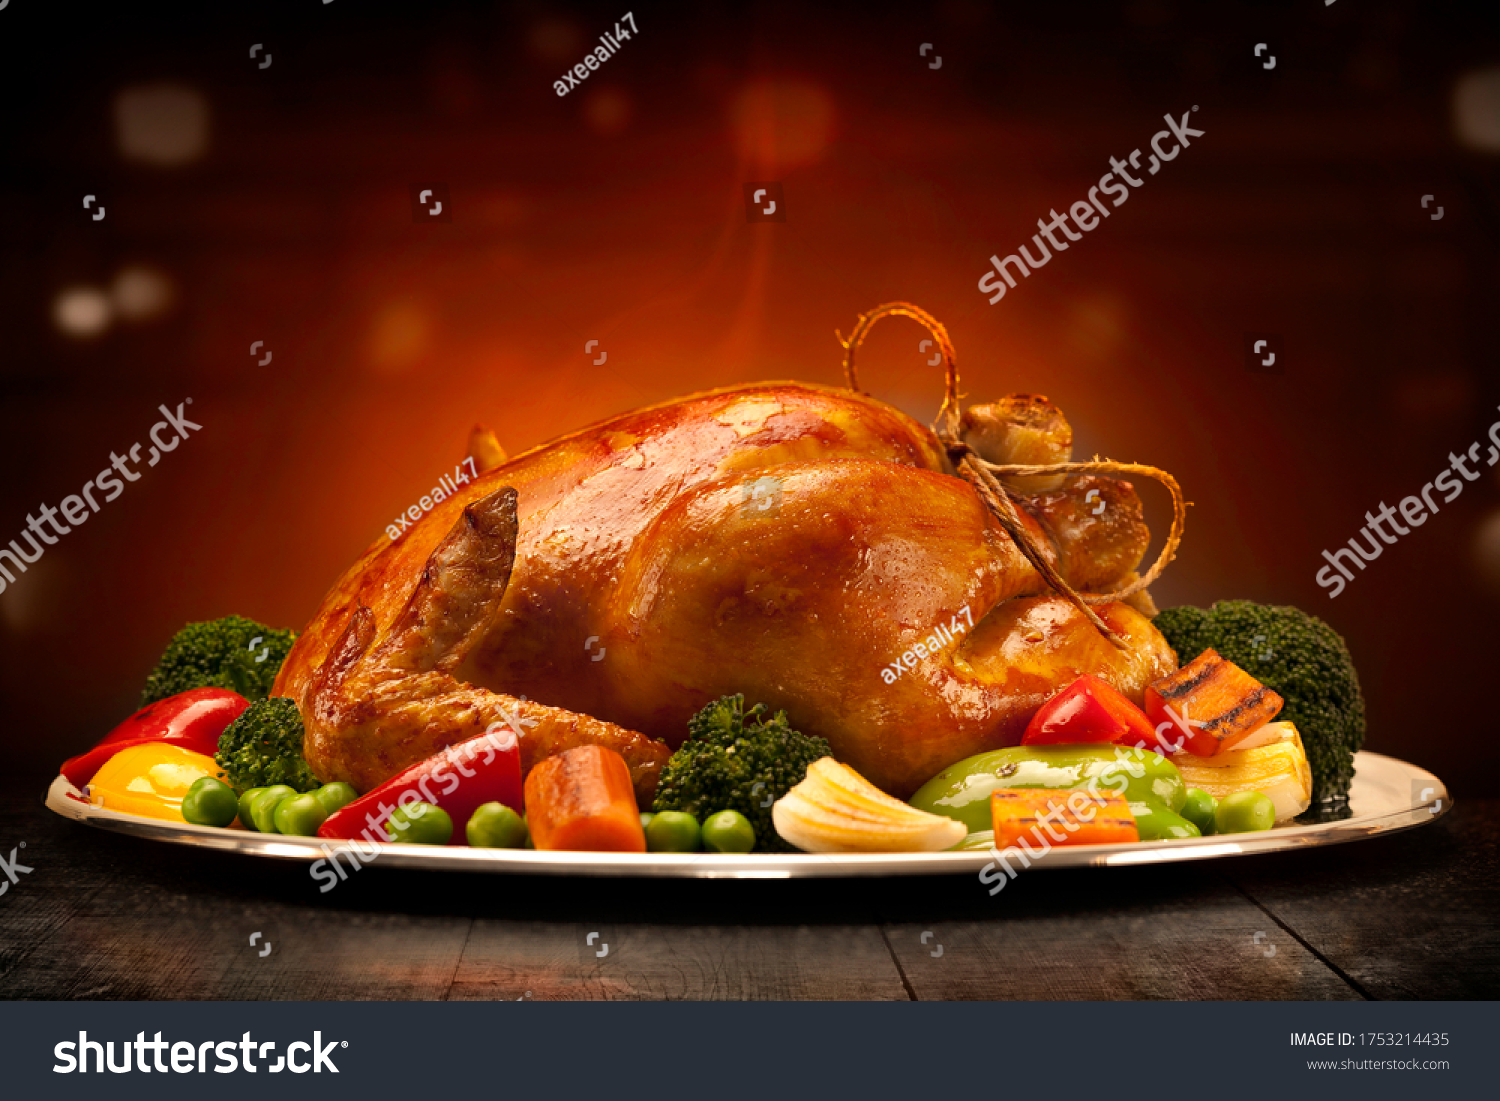 21,538 Chicken side view Stock Photos, Images & Photography | Shutterstock